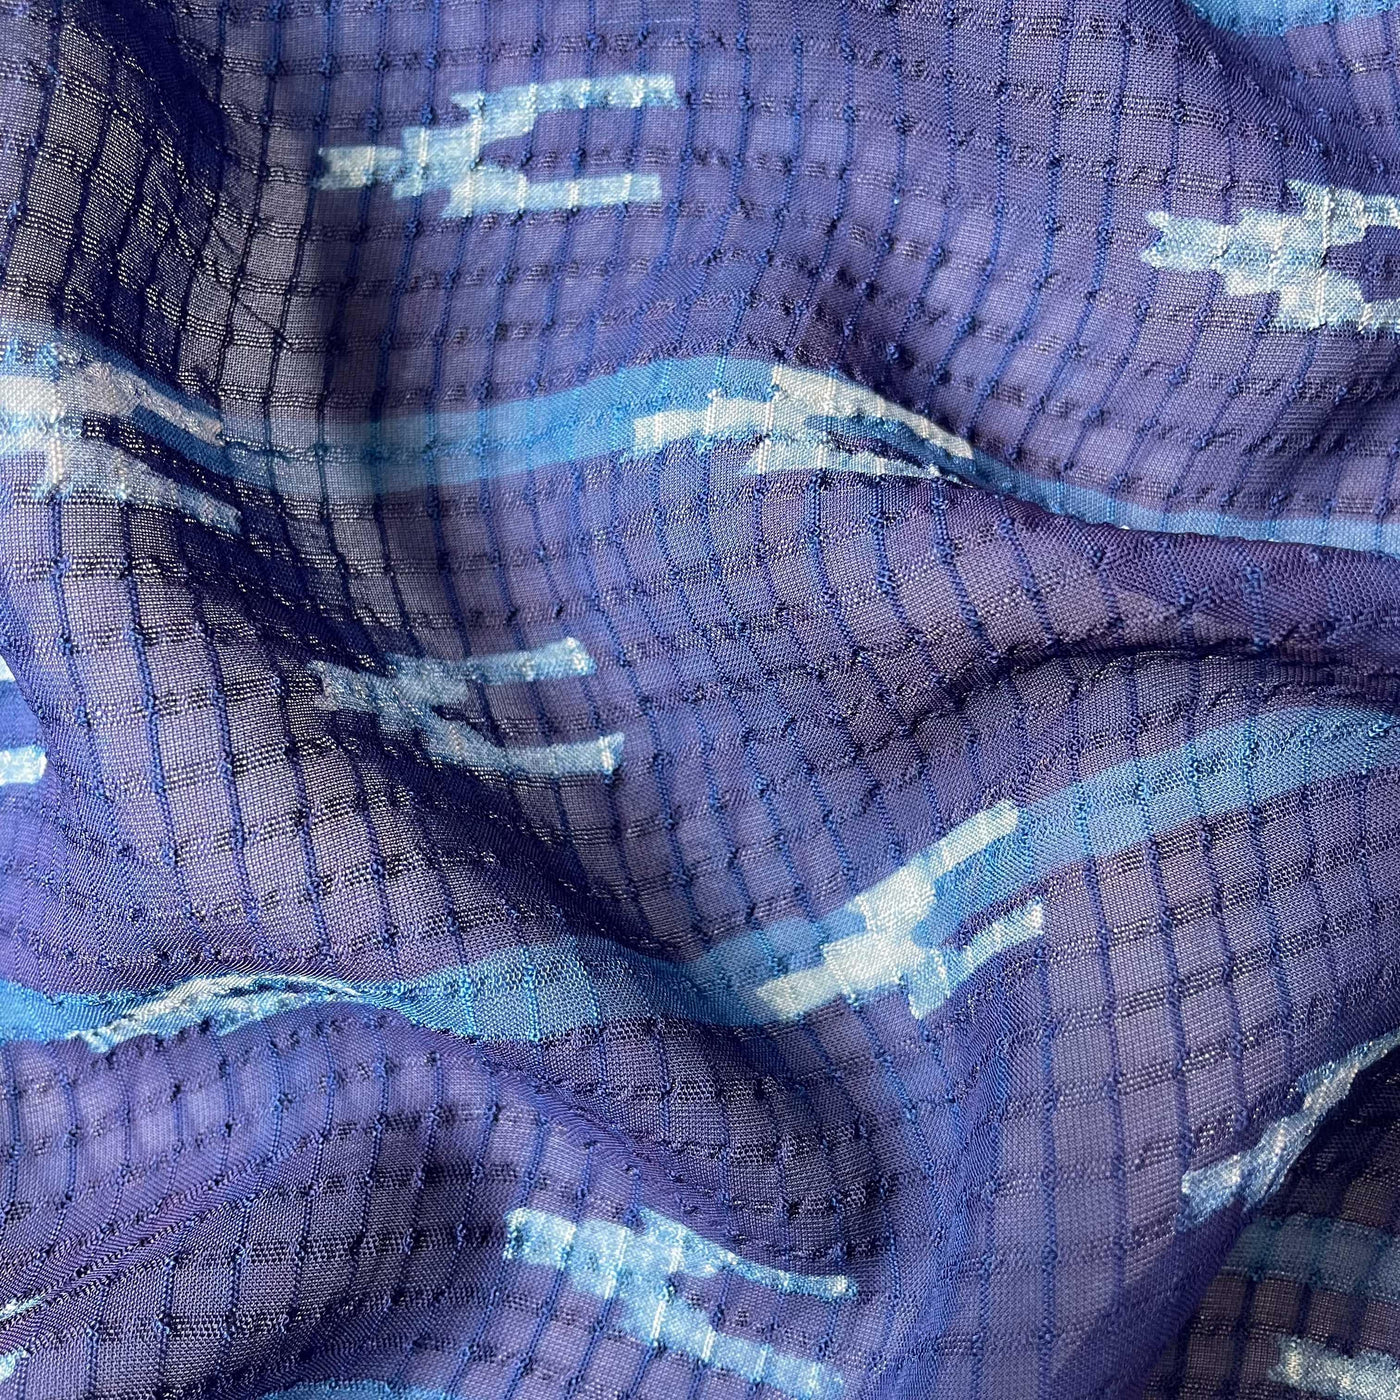 Hand Block Printed Cotton Fabric Fabric Indigo Dabu Natural Dyed Abstract Stripes Hand Block Printed Woven Georgette Fabric (Width 52 Inches)